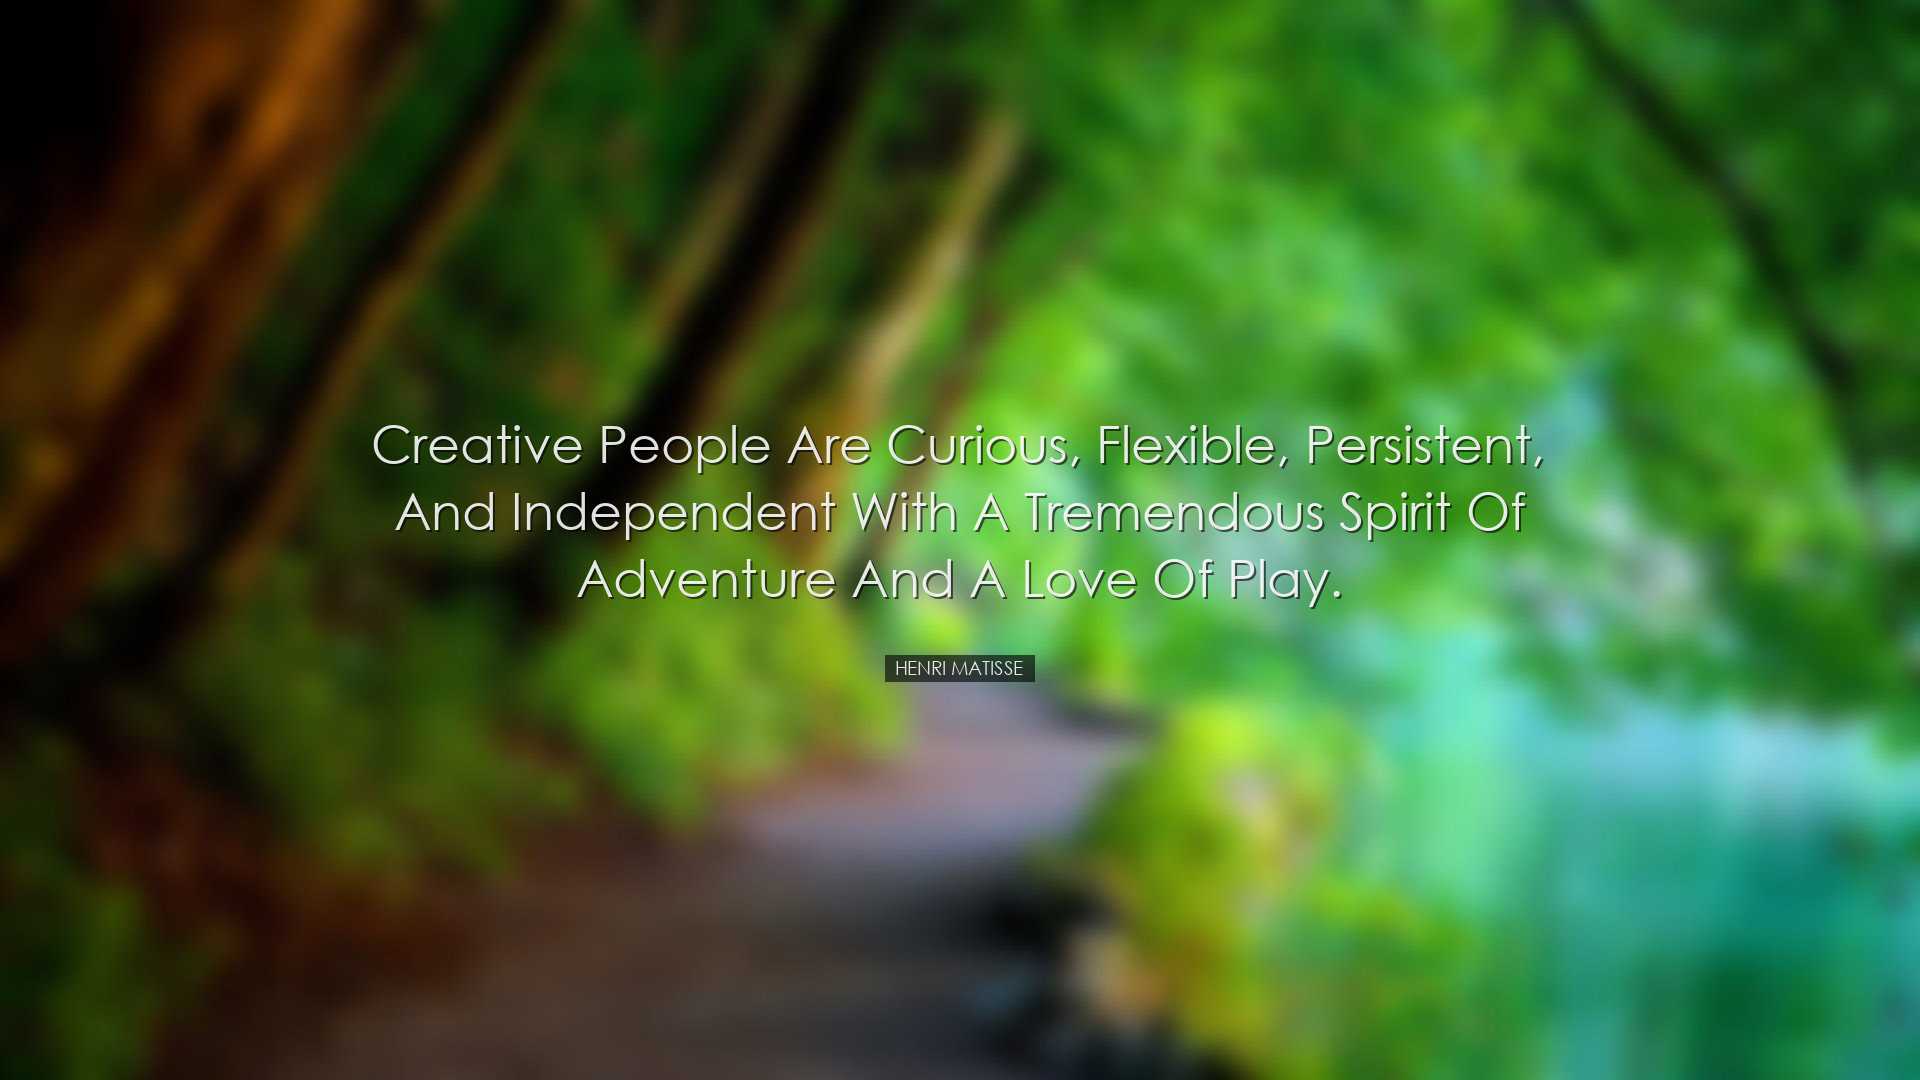 Creative people are curious, flexible, persistent, and independent